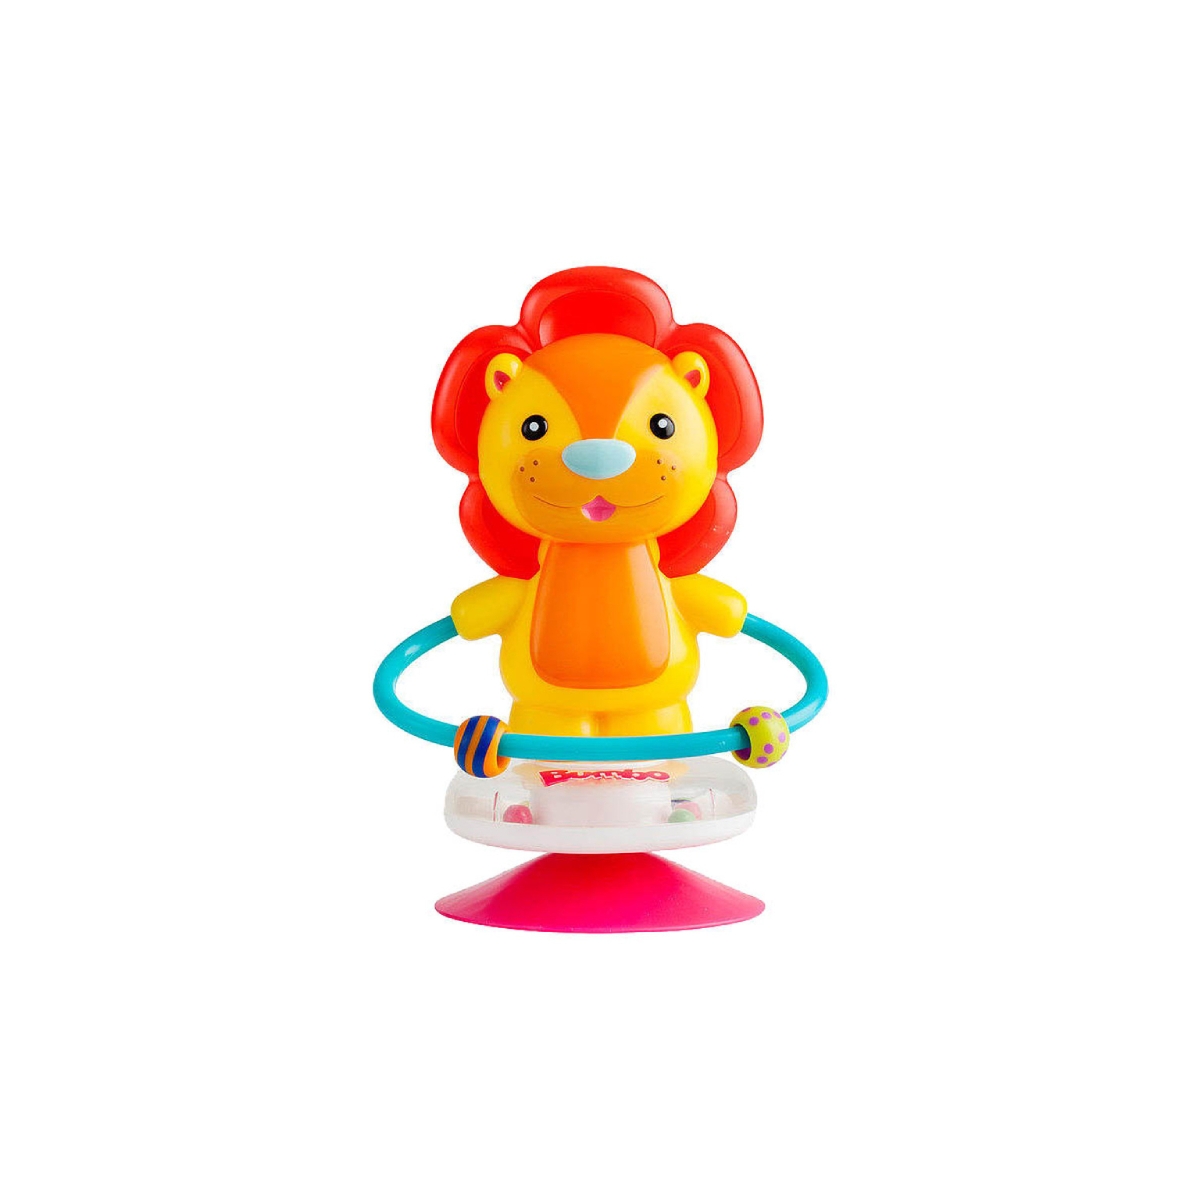 Bumbo Suction Toy